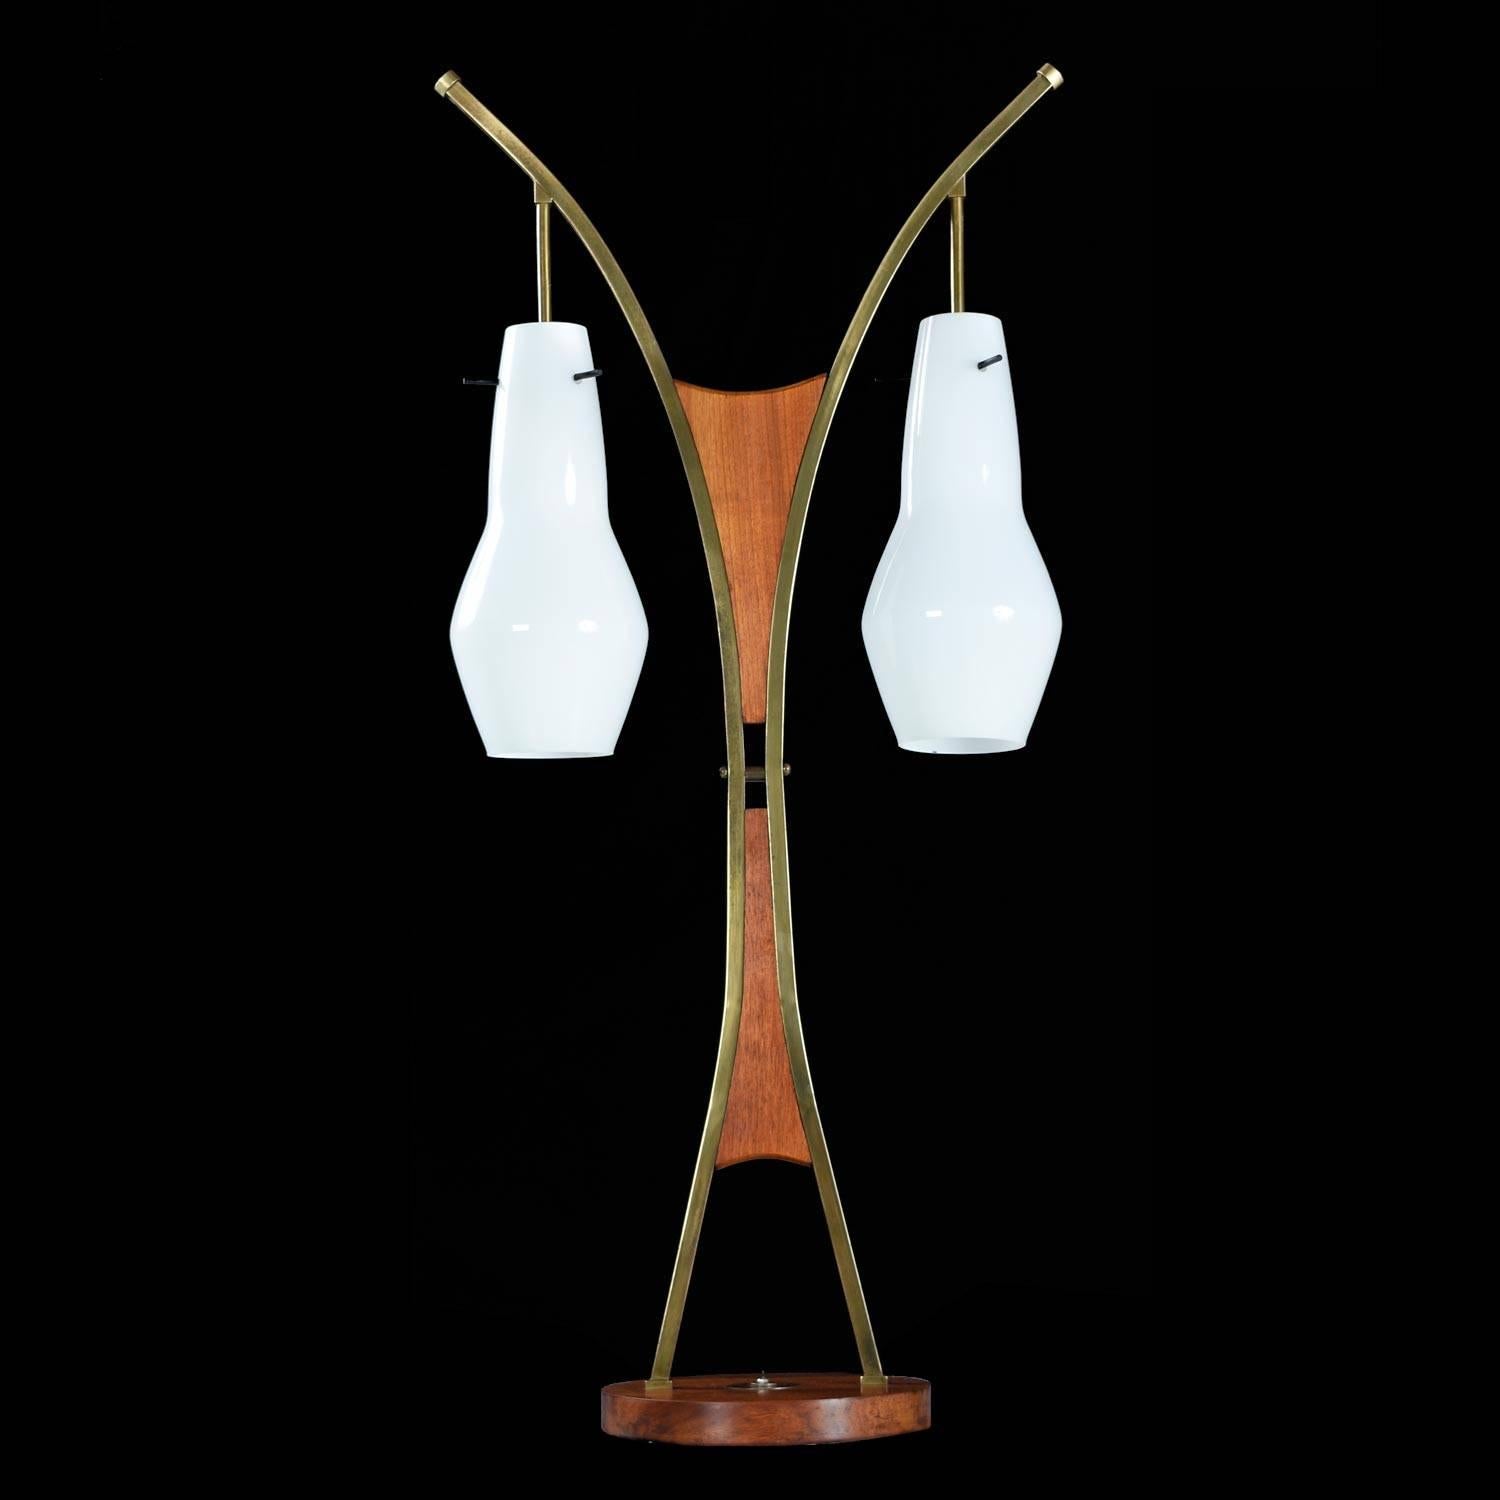 We've never seen this lamp before and had no luck deciphering its maker. None the less, it has a designer look and an sleek combination of elements. The glass shades suspend with a subtle architectural elegance against the walnut and brass backdrop.